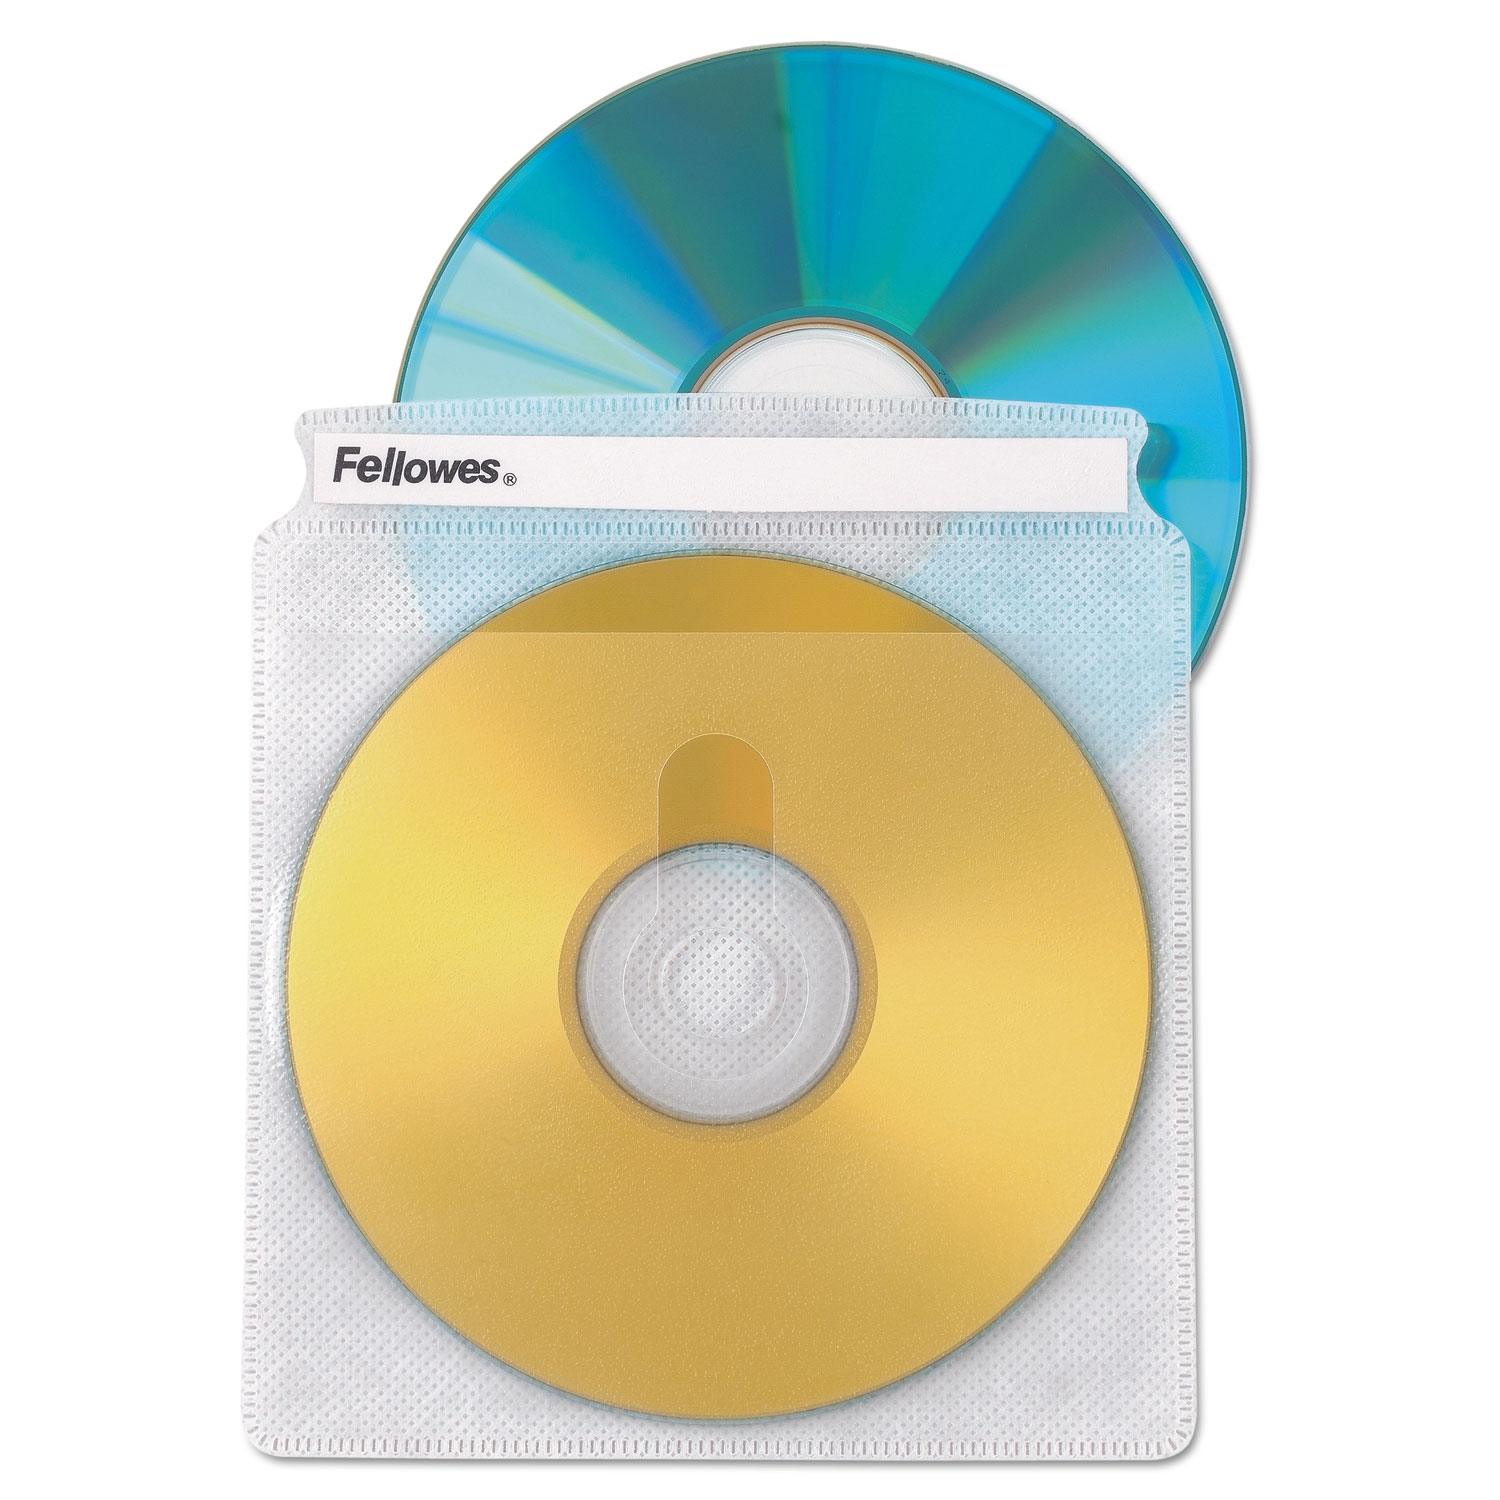  Fellowes 90661 Two-Sided CD/DVD Sleeve Refills for Softworks File, 25/Pack (FEL90661) 